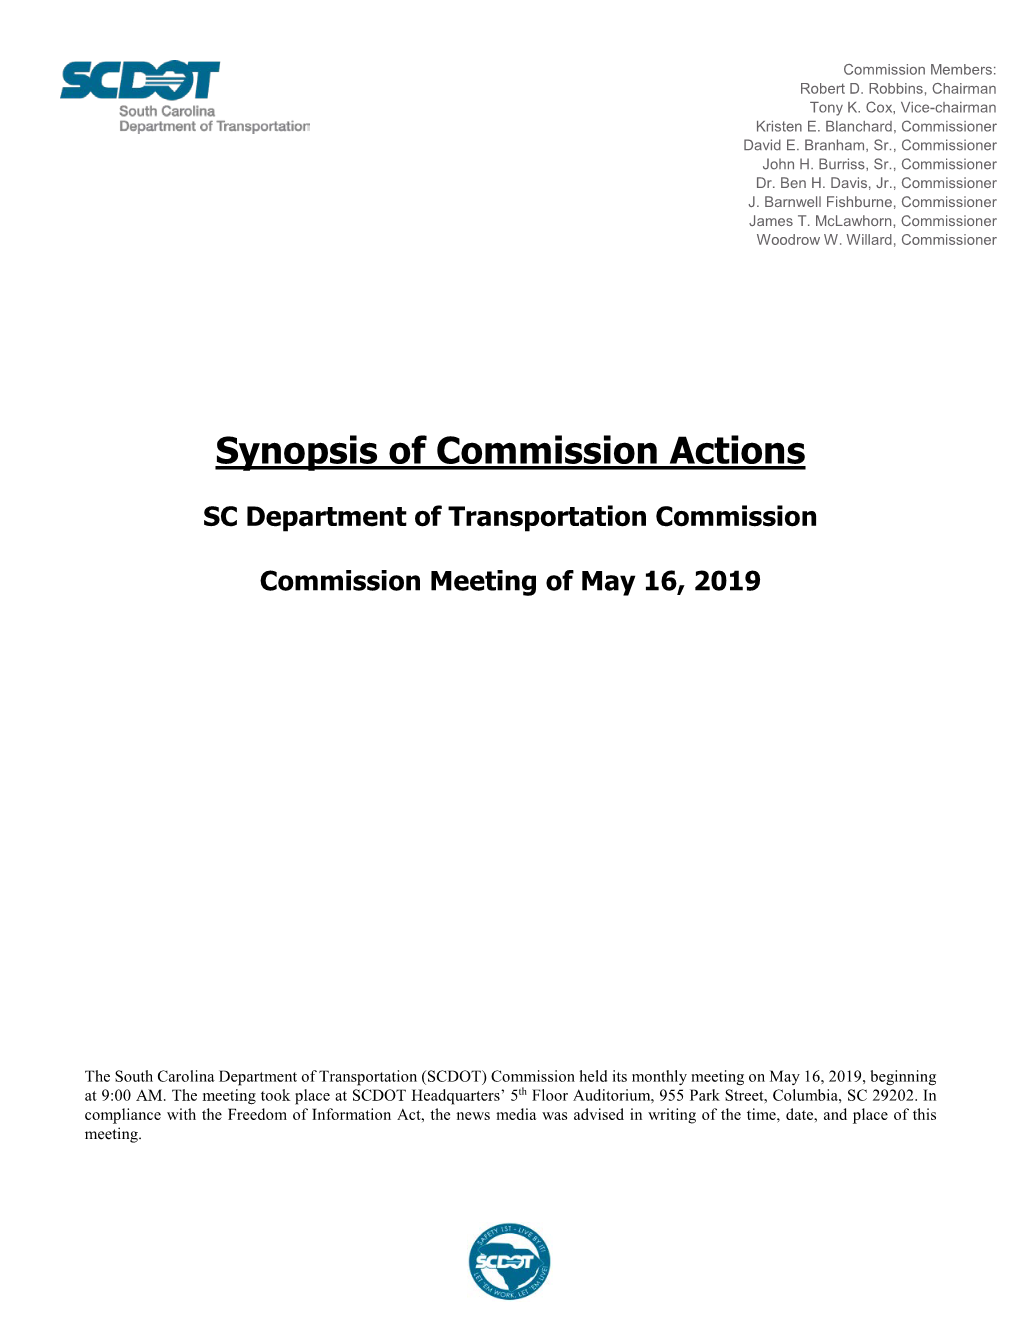 Synopsis of Commission Actions